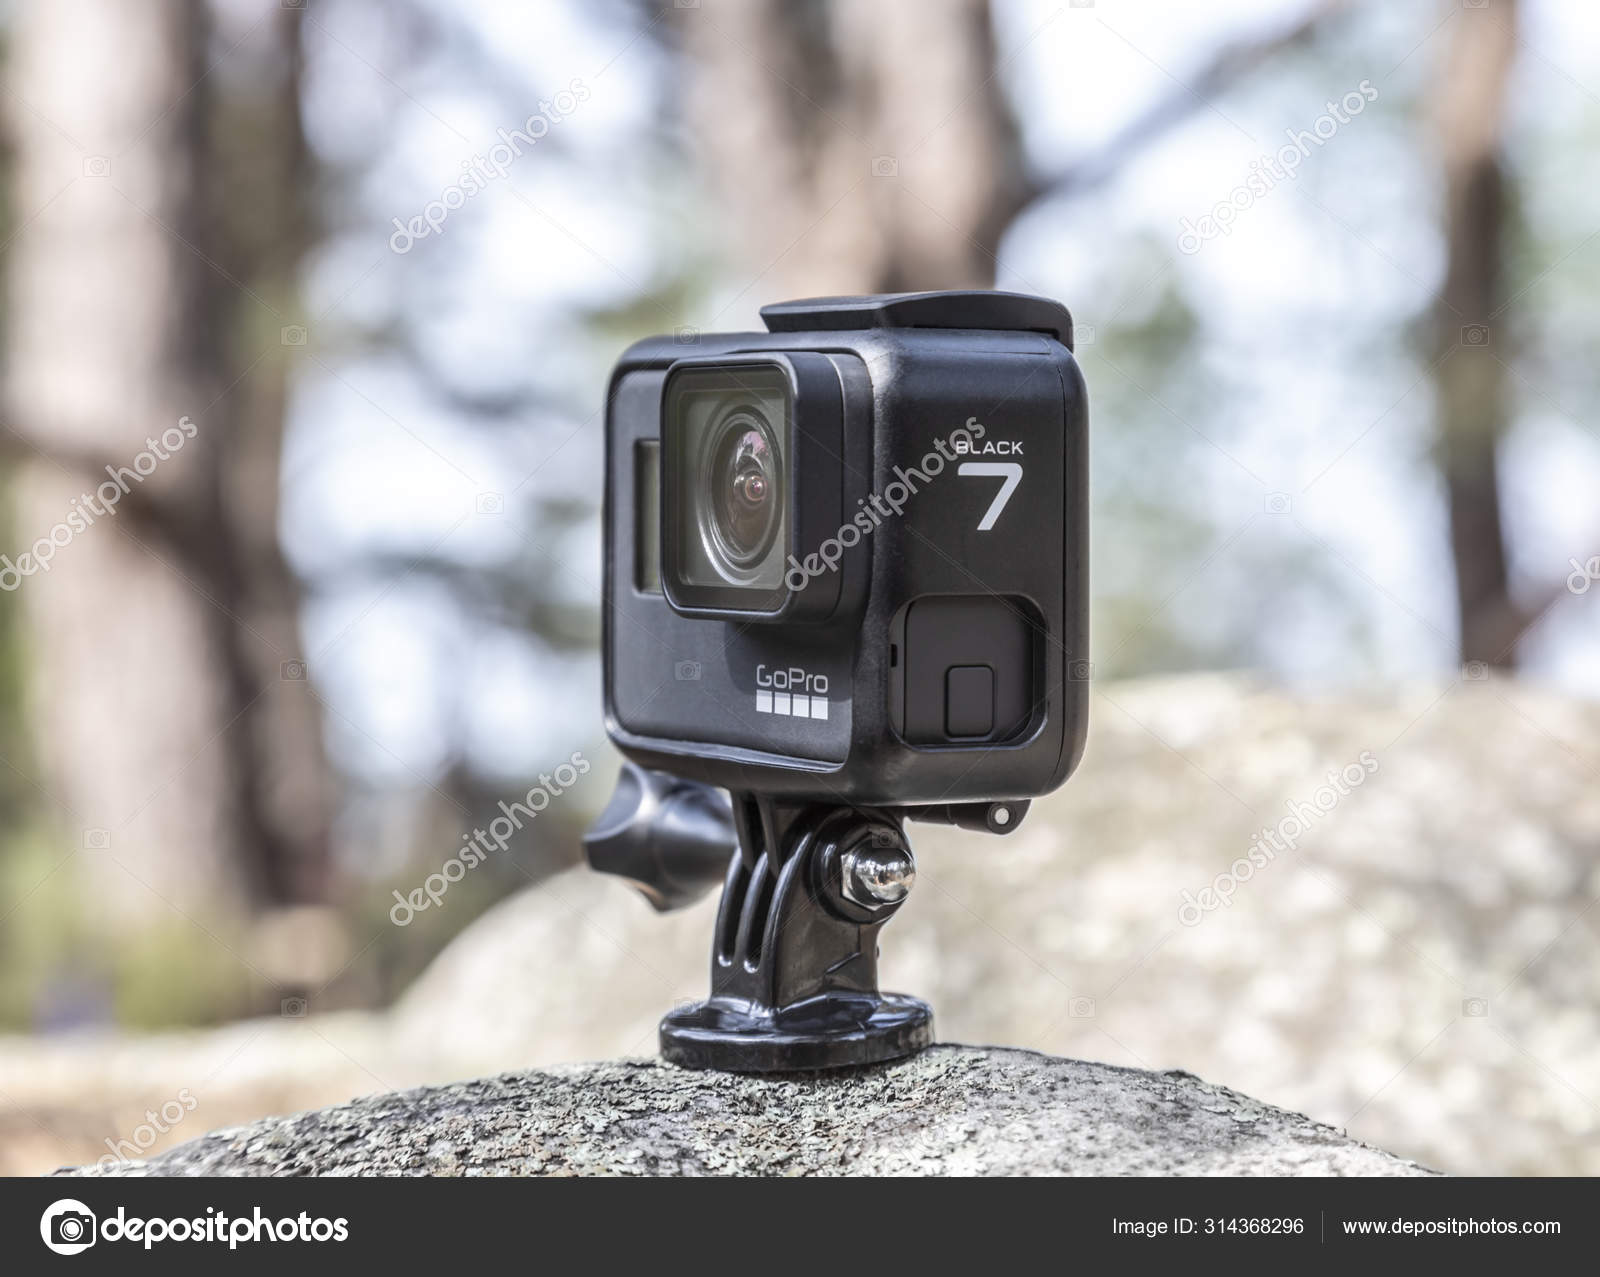 26 Gopro Hero 7 Black Stock Photos Royalty Free Images Pictures